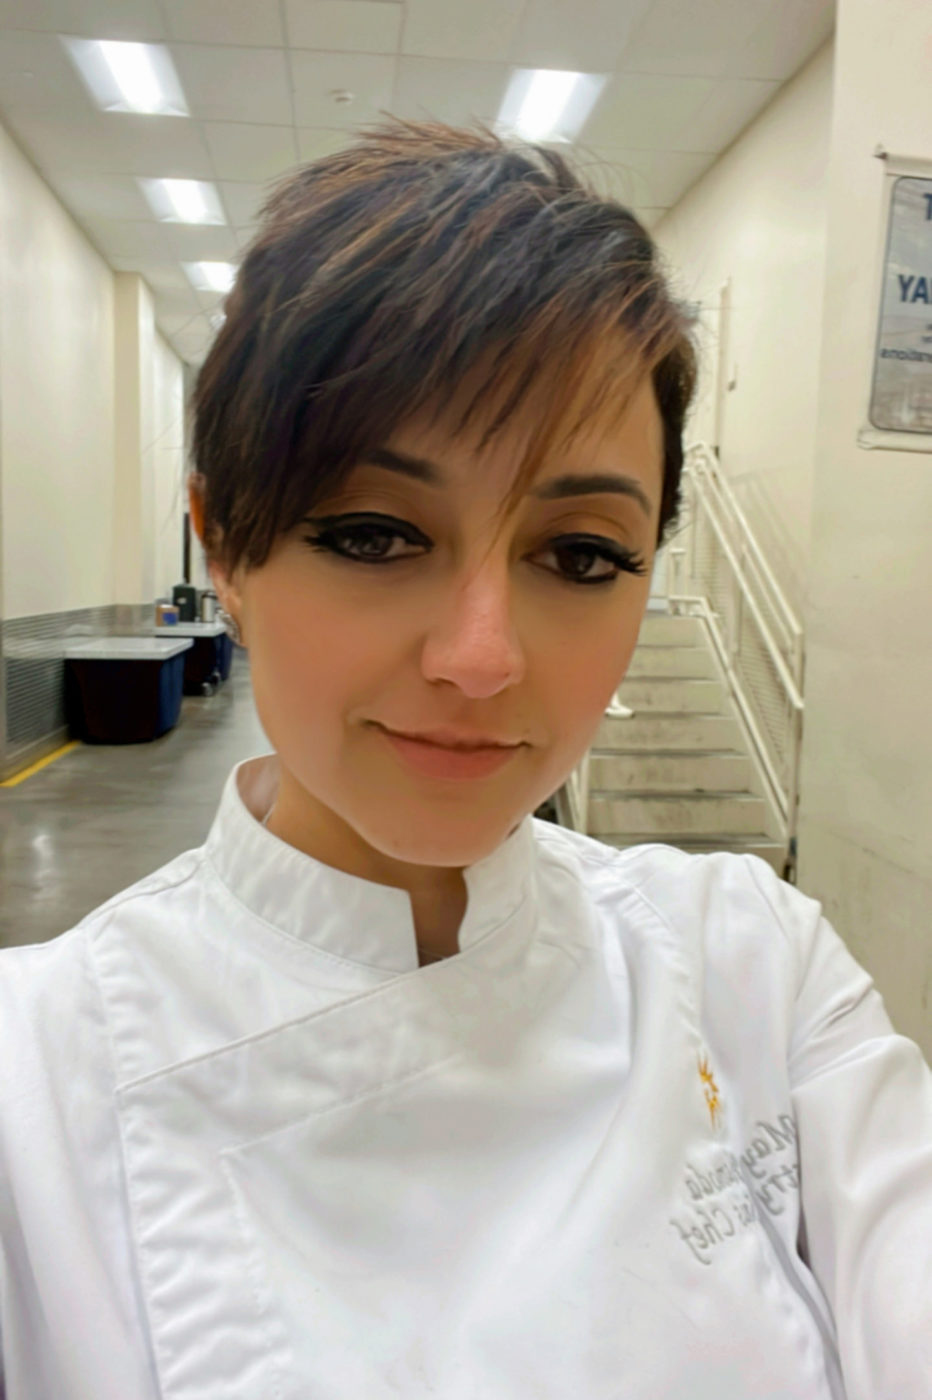 may h marriott pastry sous chef in gaylord uniform